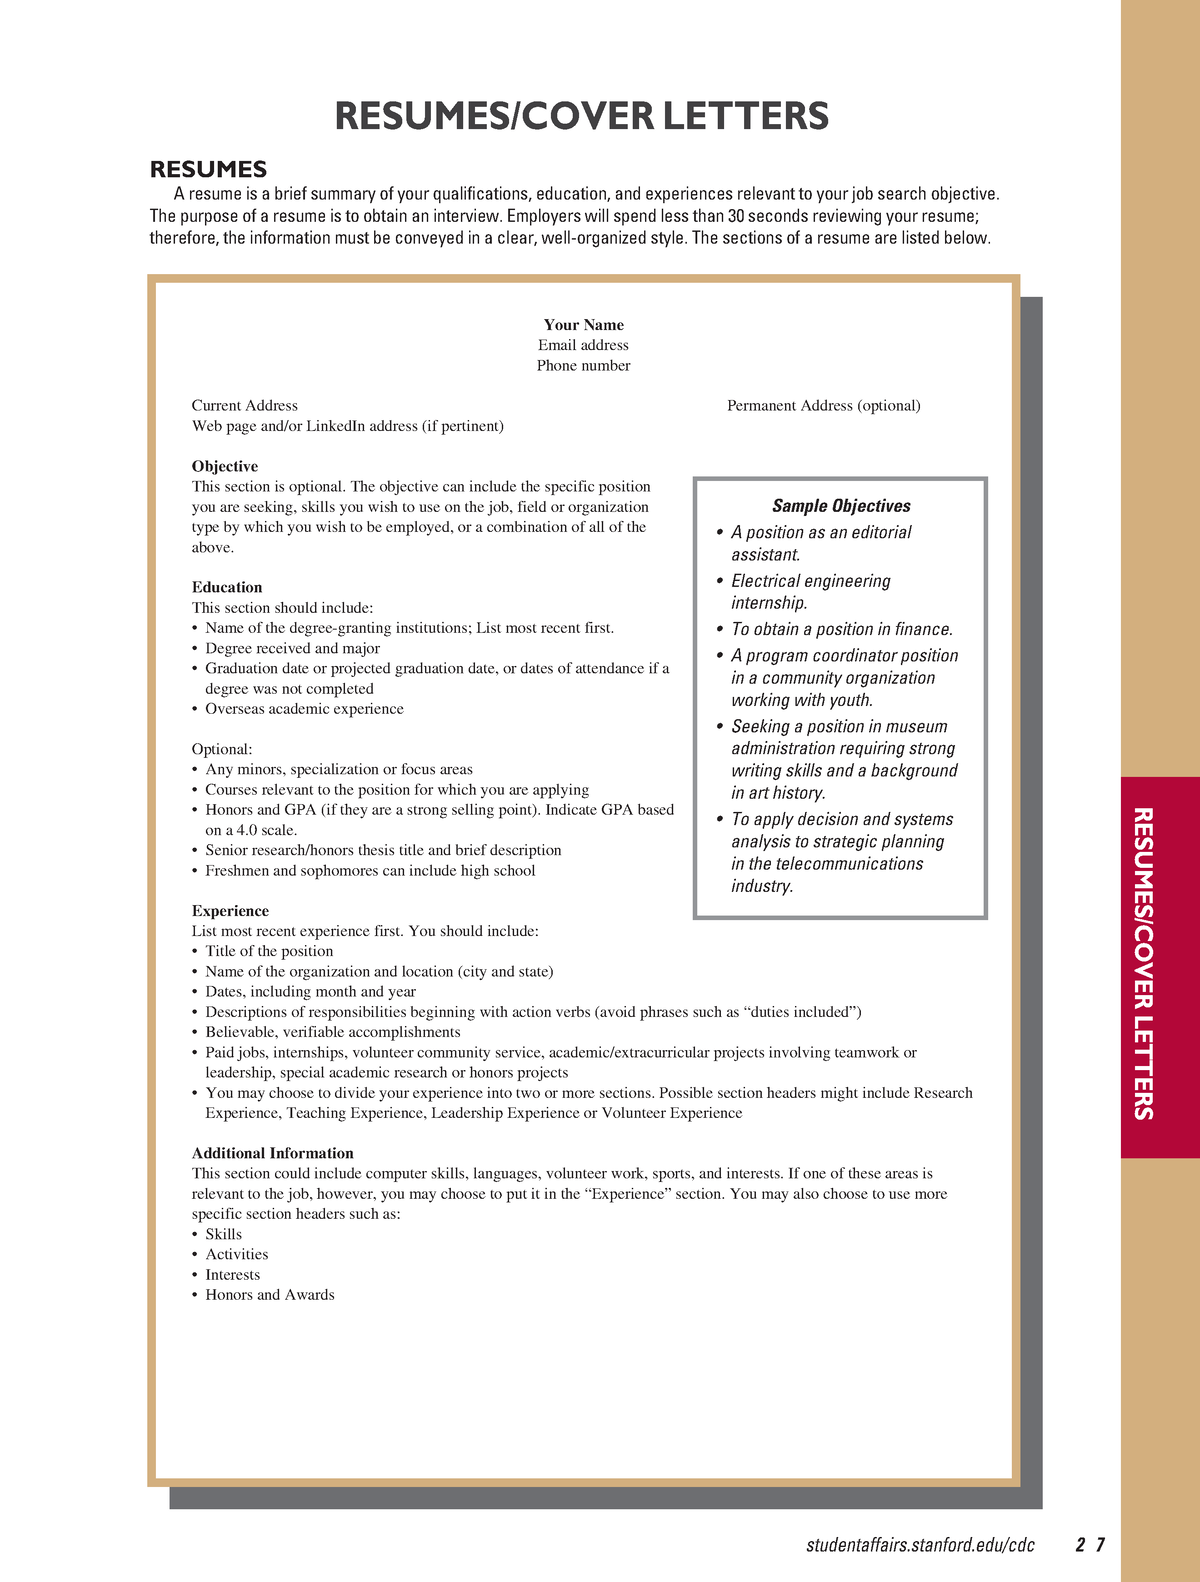 Stanford University Resume Cover Letter Guide studentaffairs/cdc 2 7